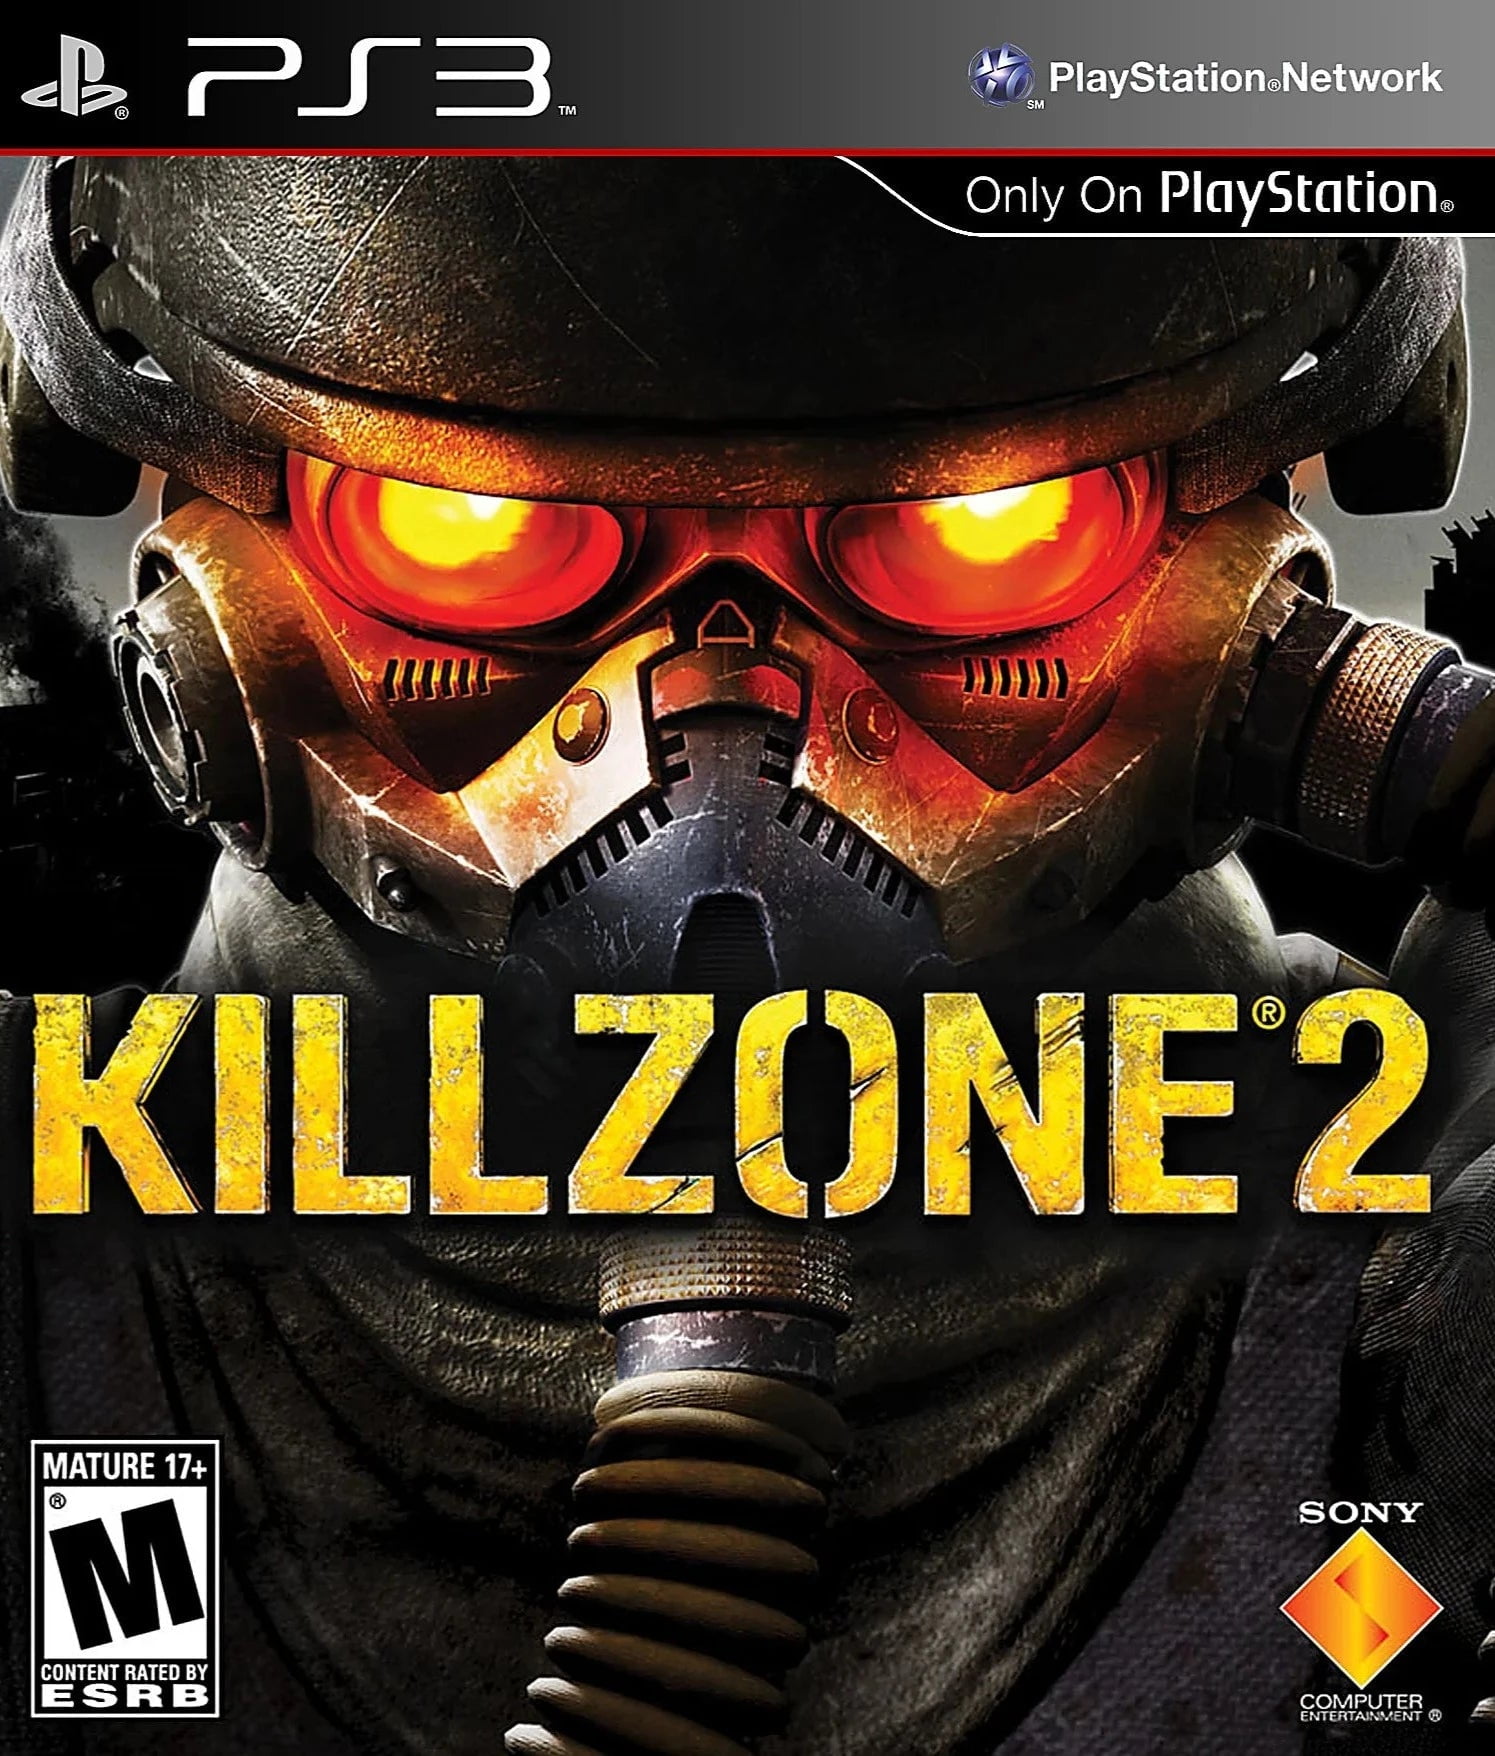 Killzone (Sony PlayStation 2, PS2) Game Complete CIB Black Label Tested